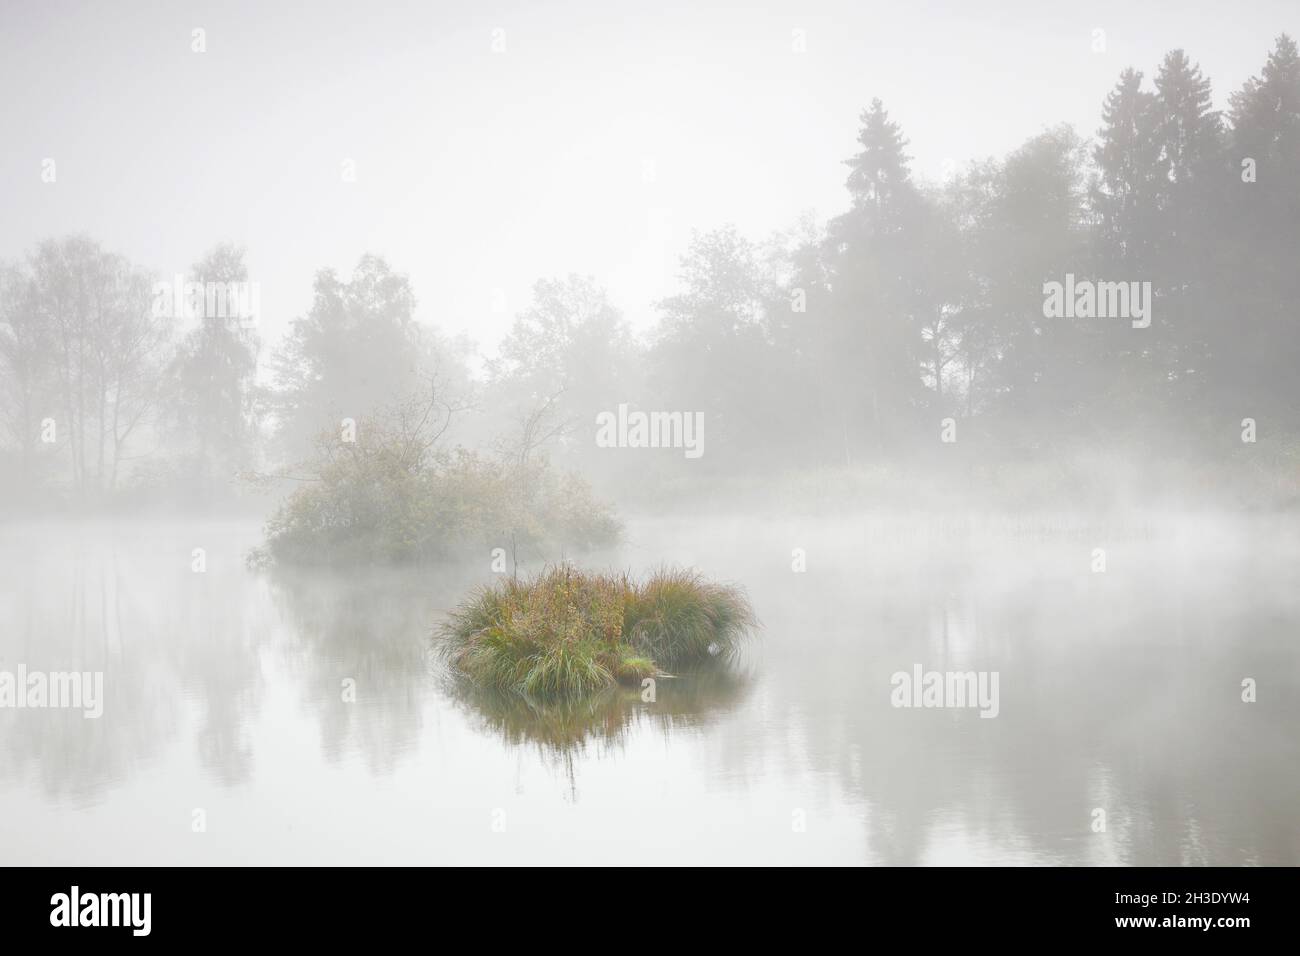 Morning mood with hoar frost at a pond in nature reserve Wildert in autumn, Switzerland, Illnau Stock Photo